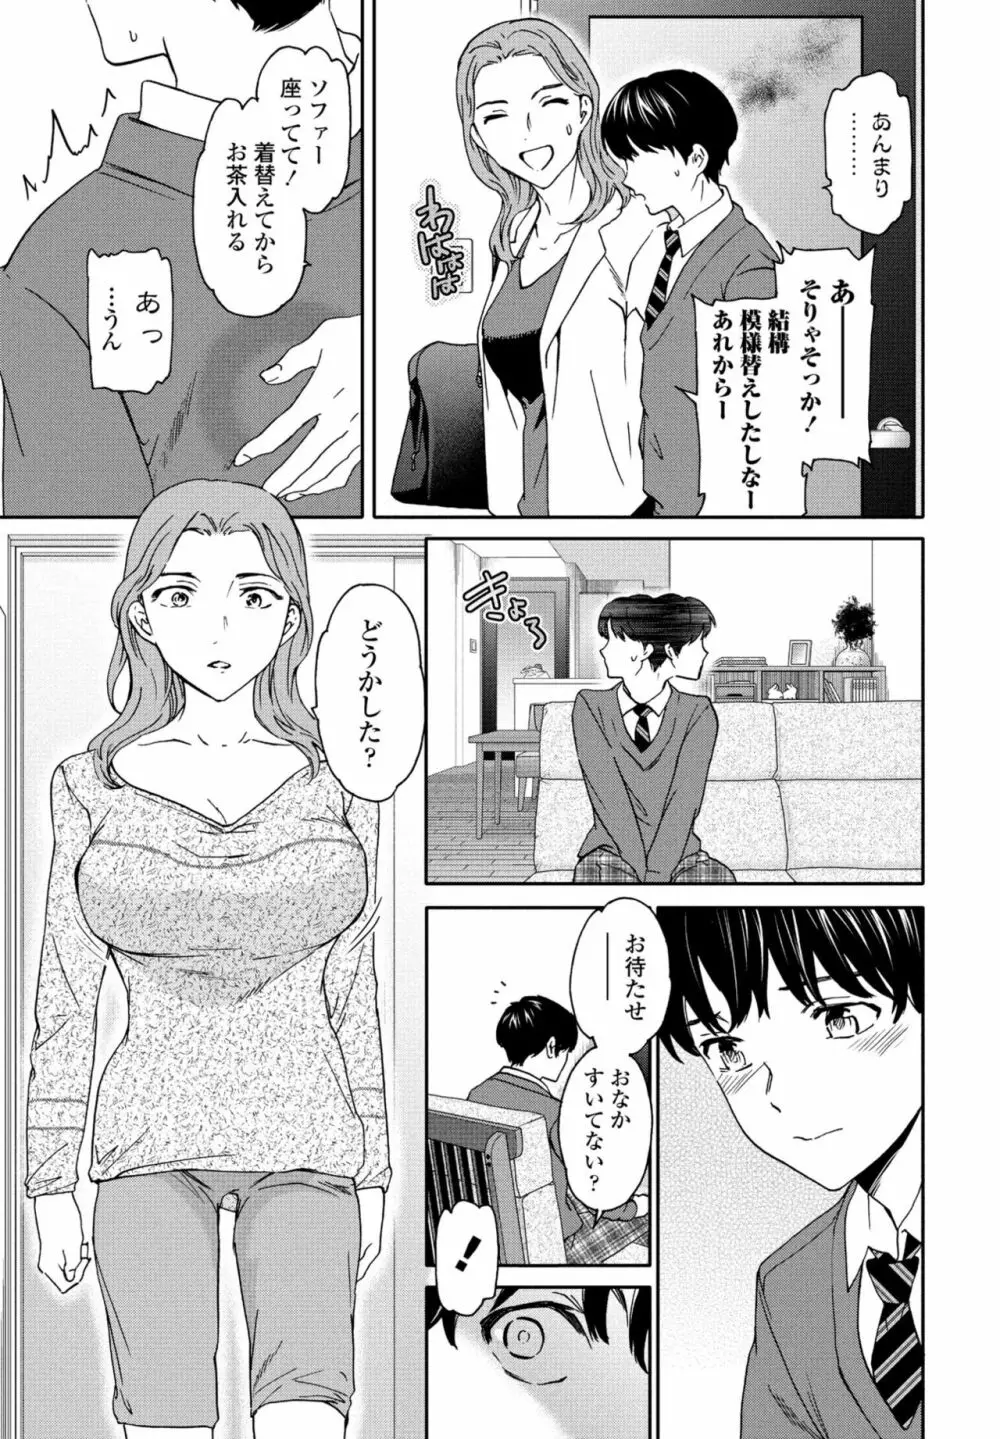 COMIC 桃姫DEEPEST Vol. 3 Page.21